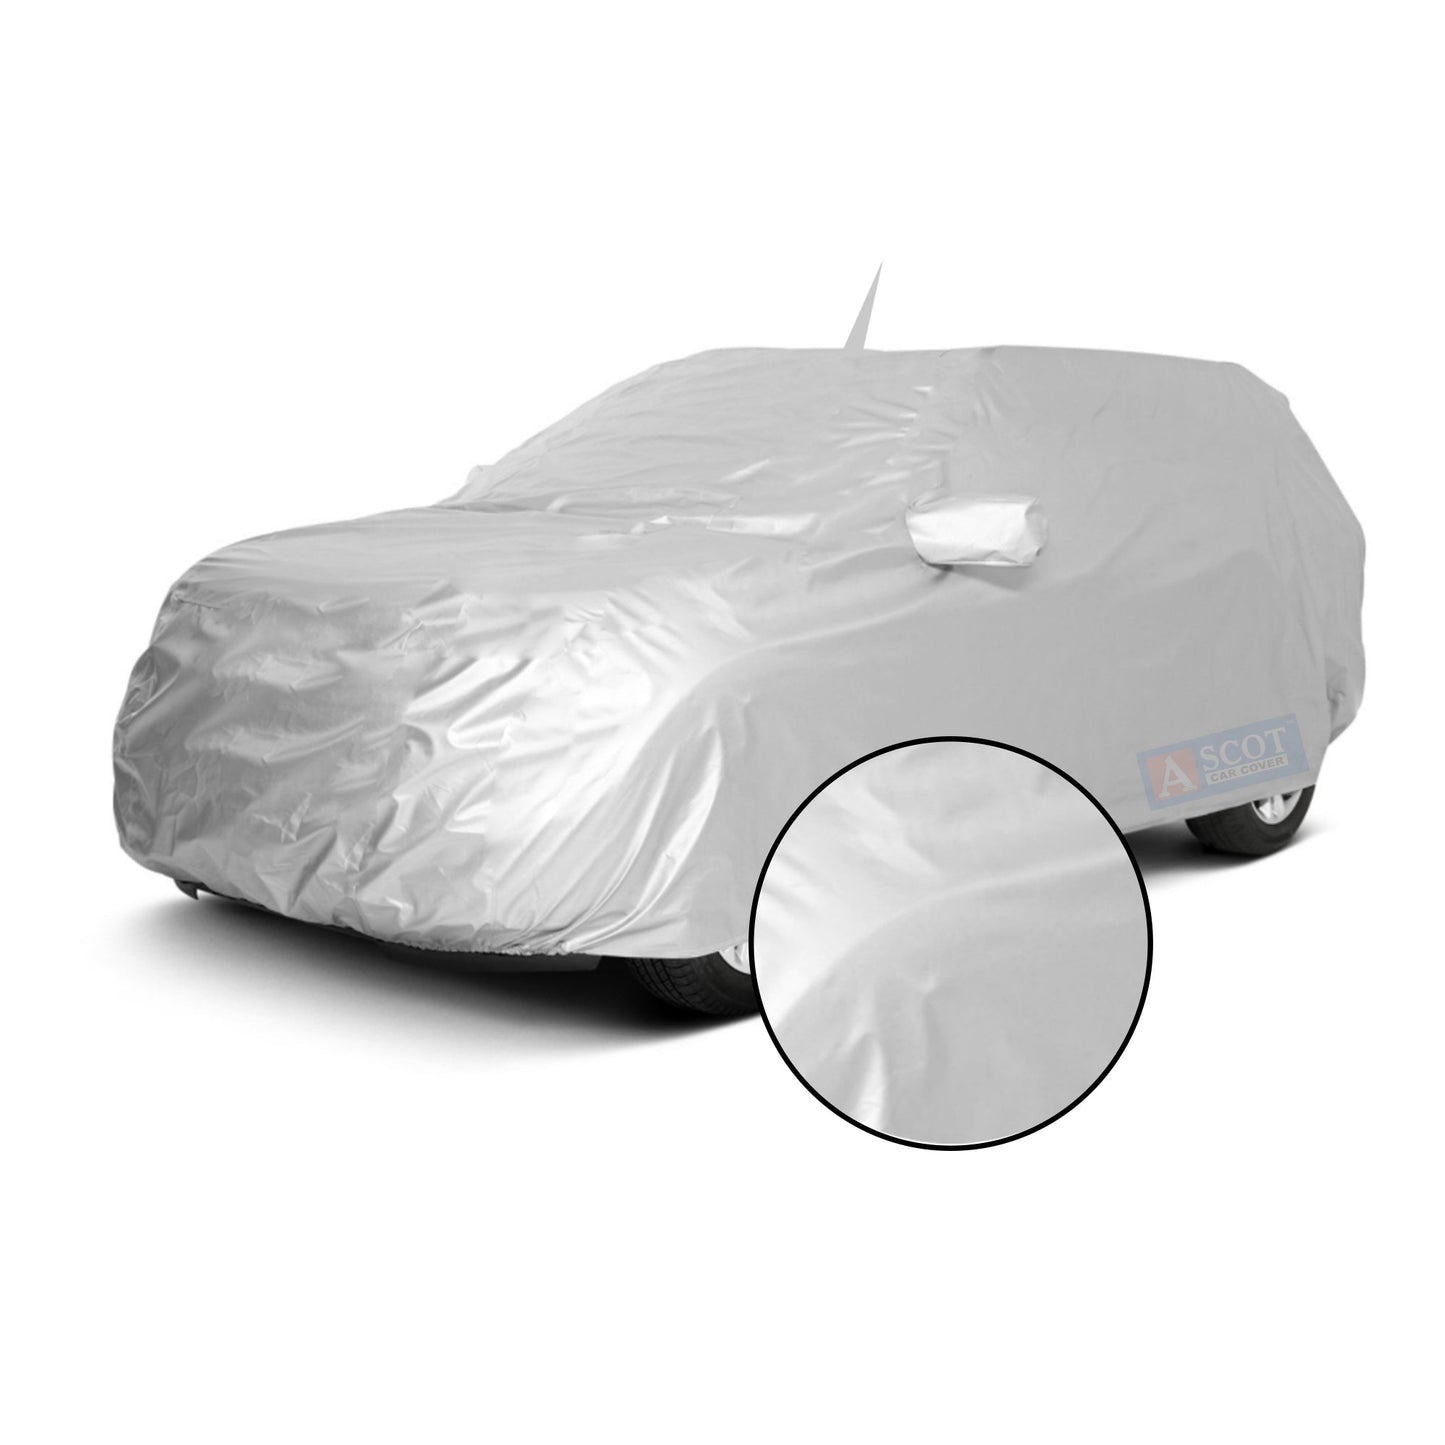 Ascot Toyota Urban Cruiser Car Body Cover Dust Proof, Trippel Stitched